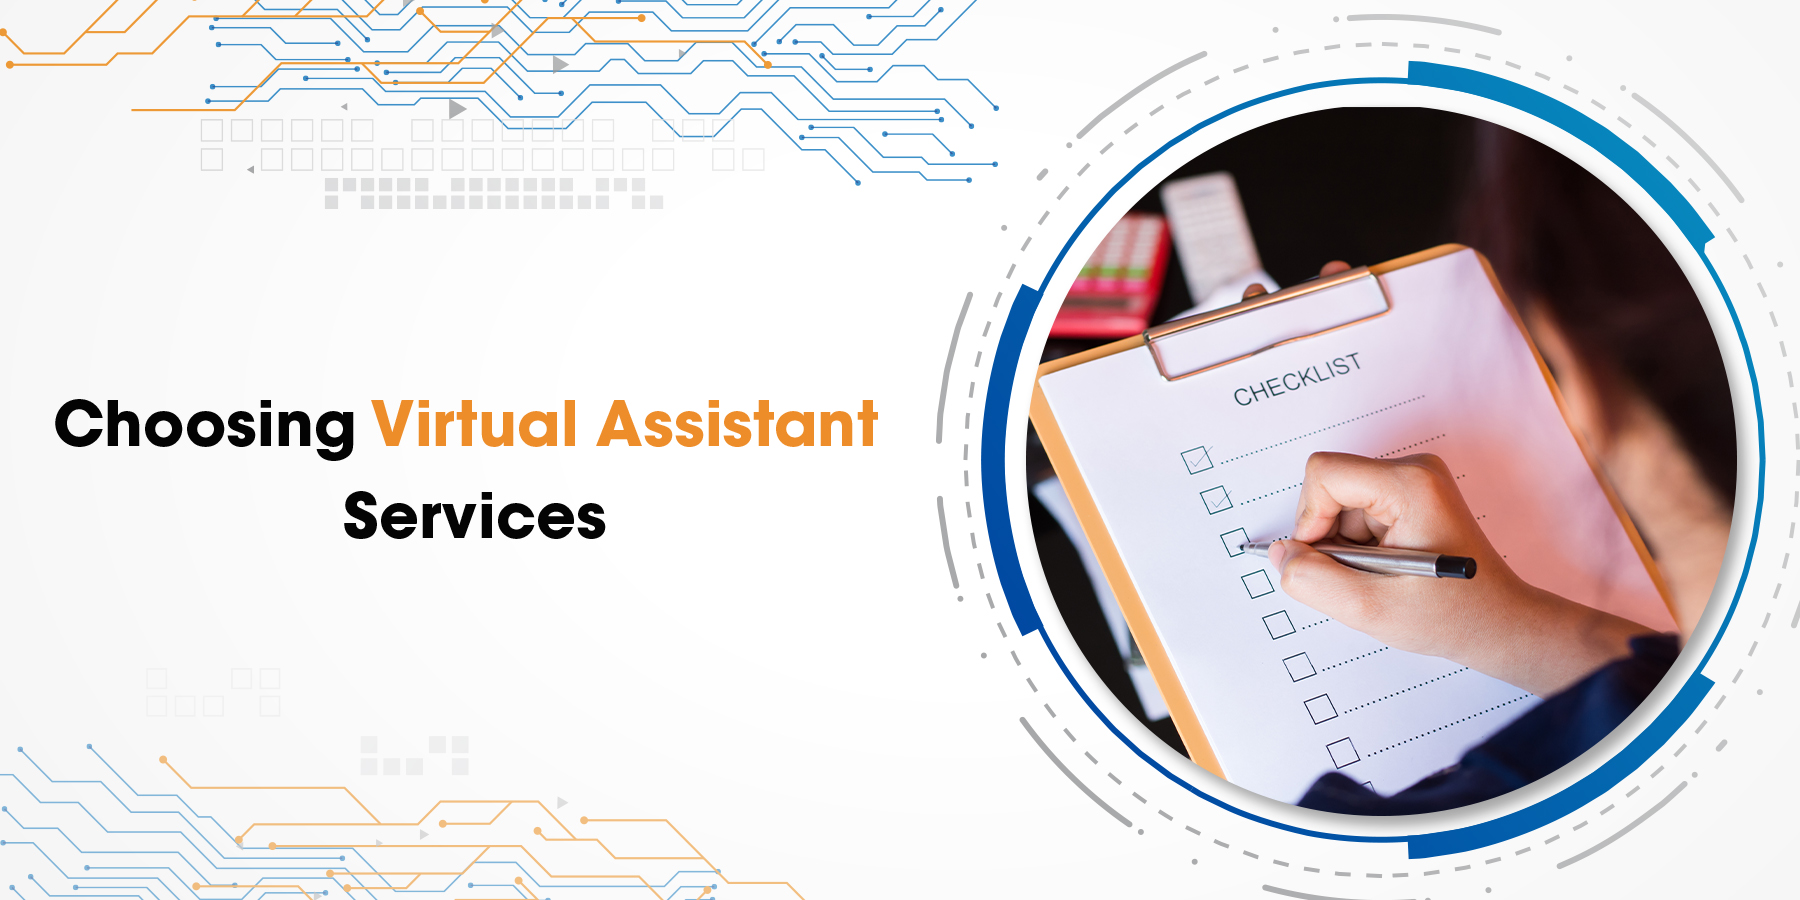 Your Checklist to Evaluate the Right Virtual Assistant Services Provider